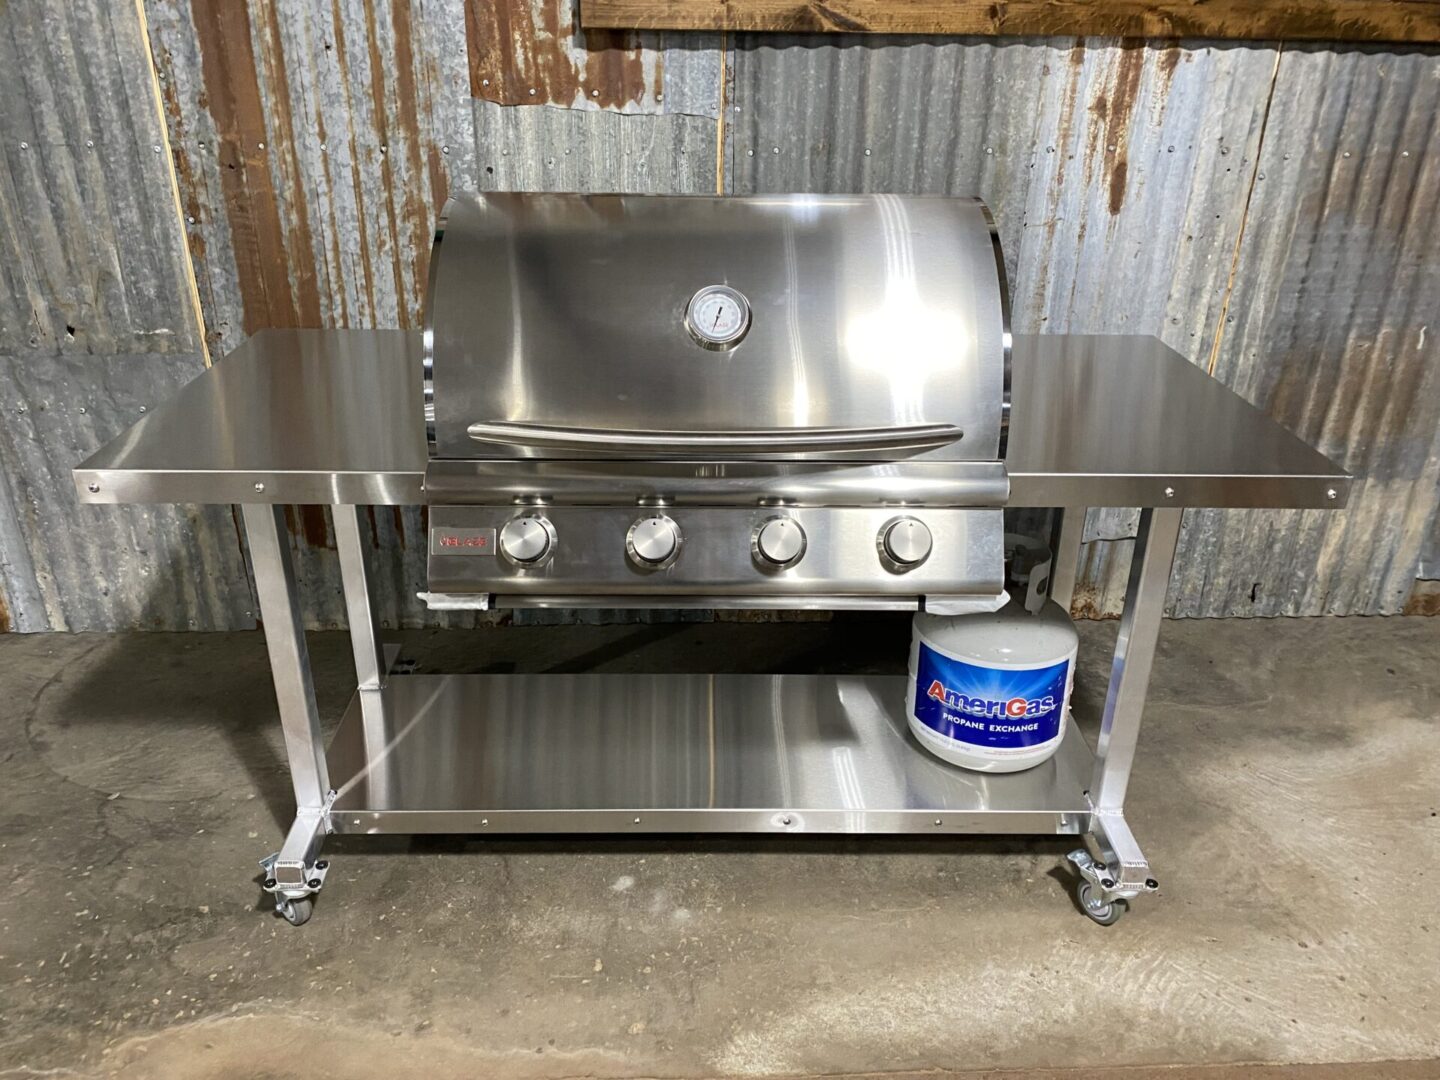 Hawthorne tables is now a Blaze Grills distributor